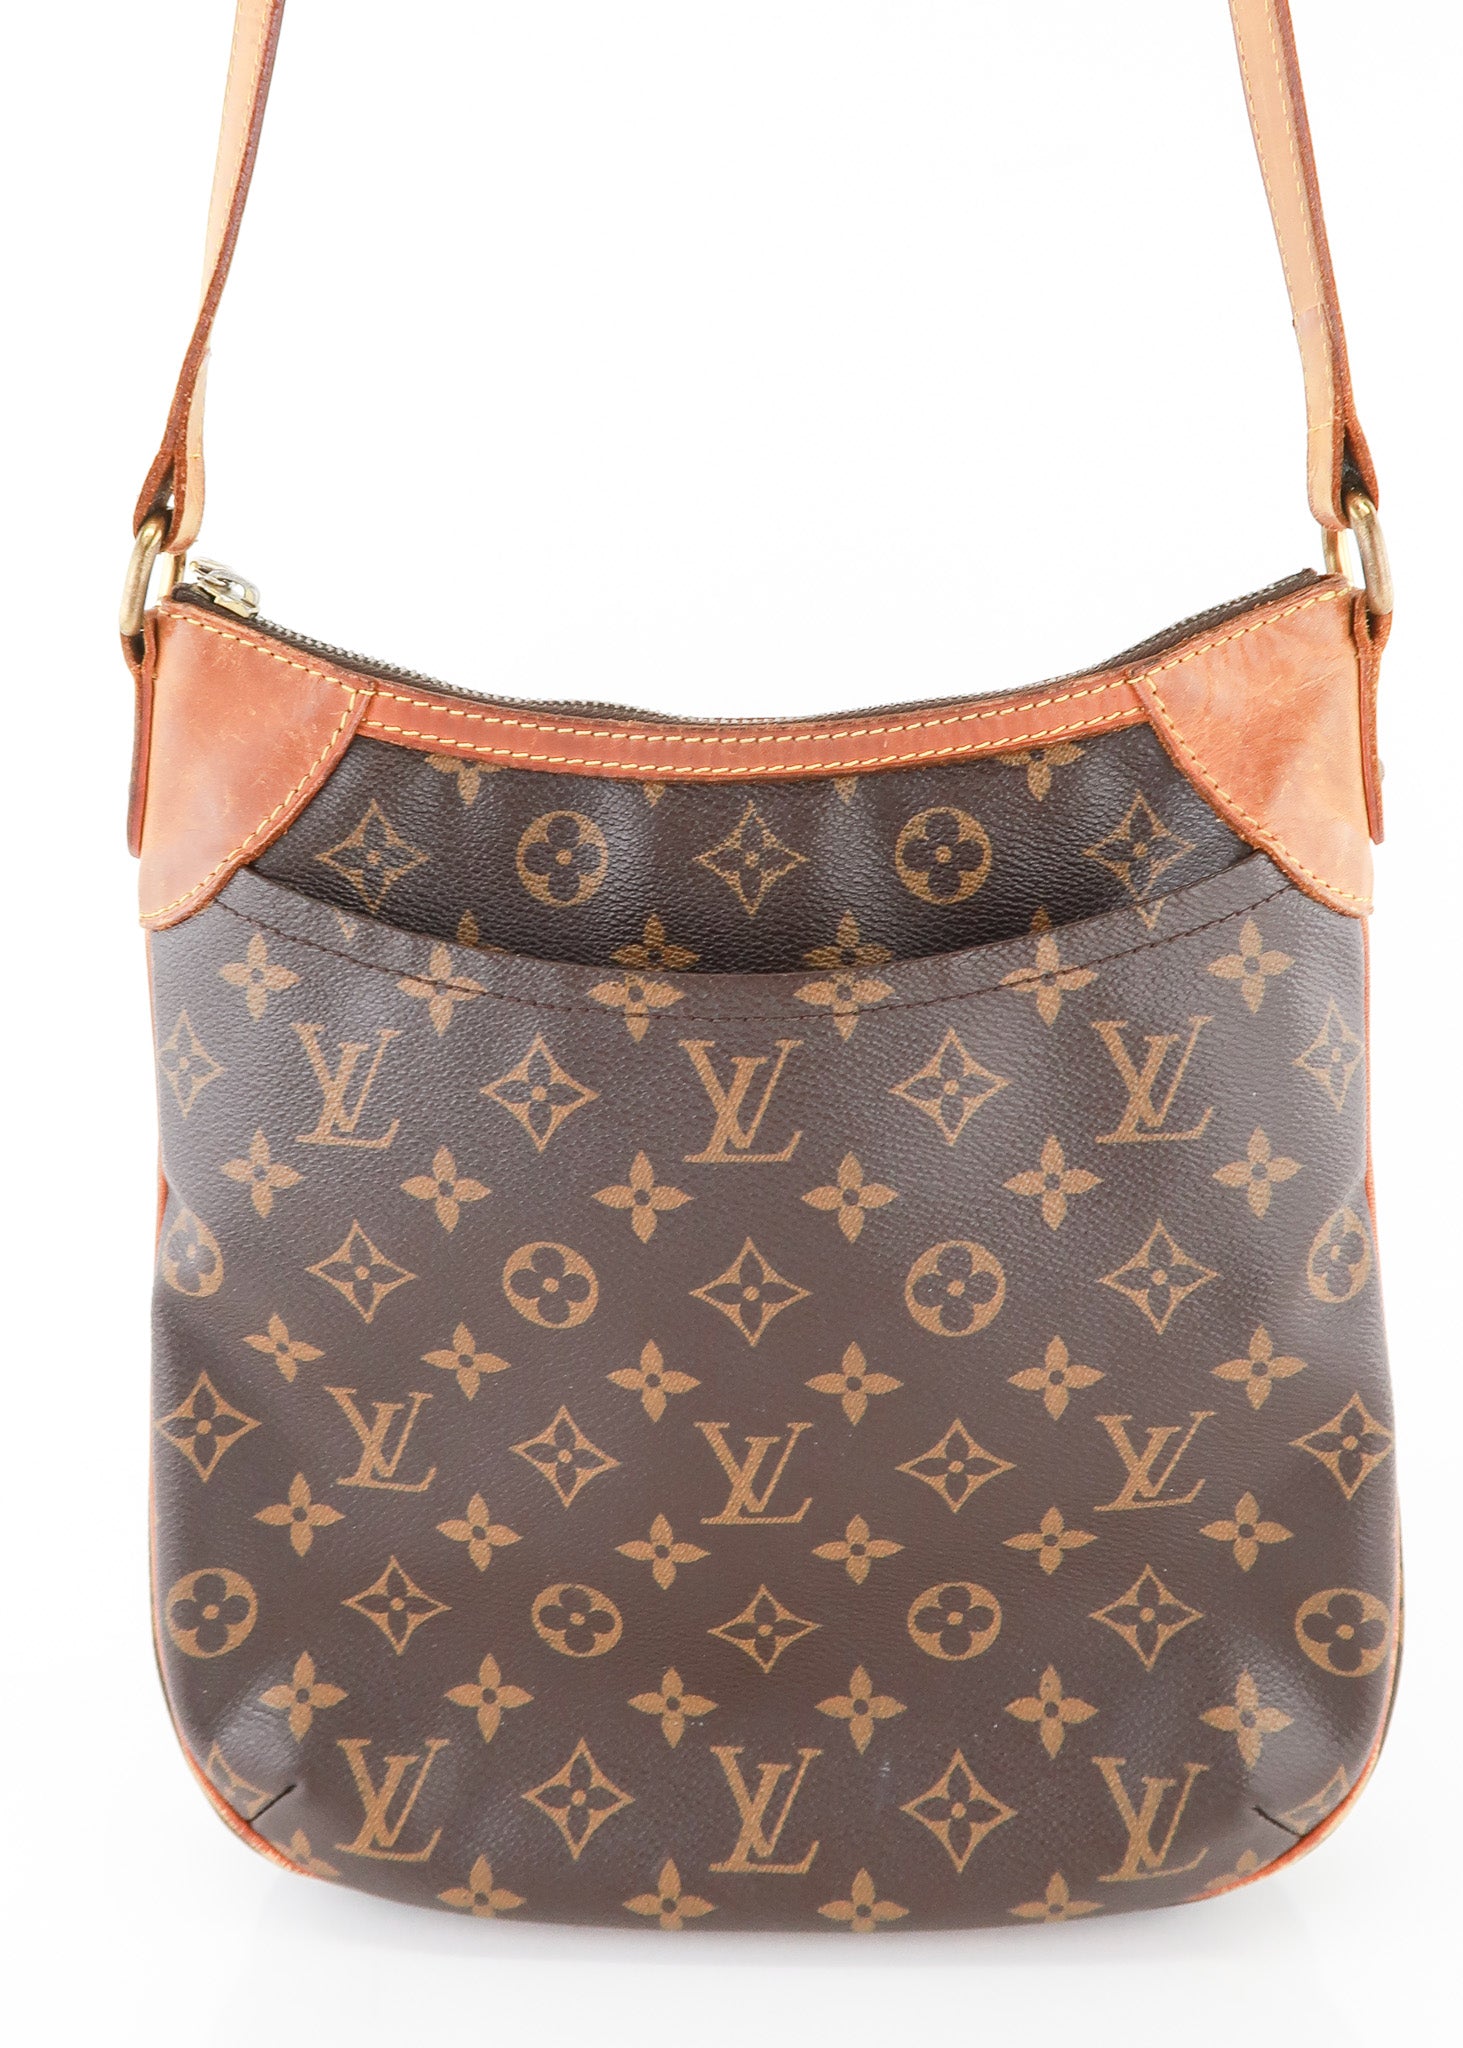 Buy Brand New & Pre-Owned Luxury LOUIS VUITTON ODEON PM M56390 Online